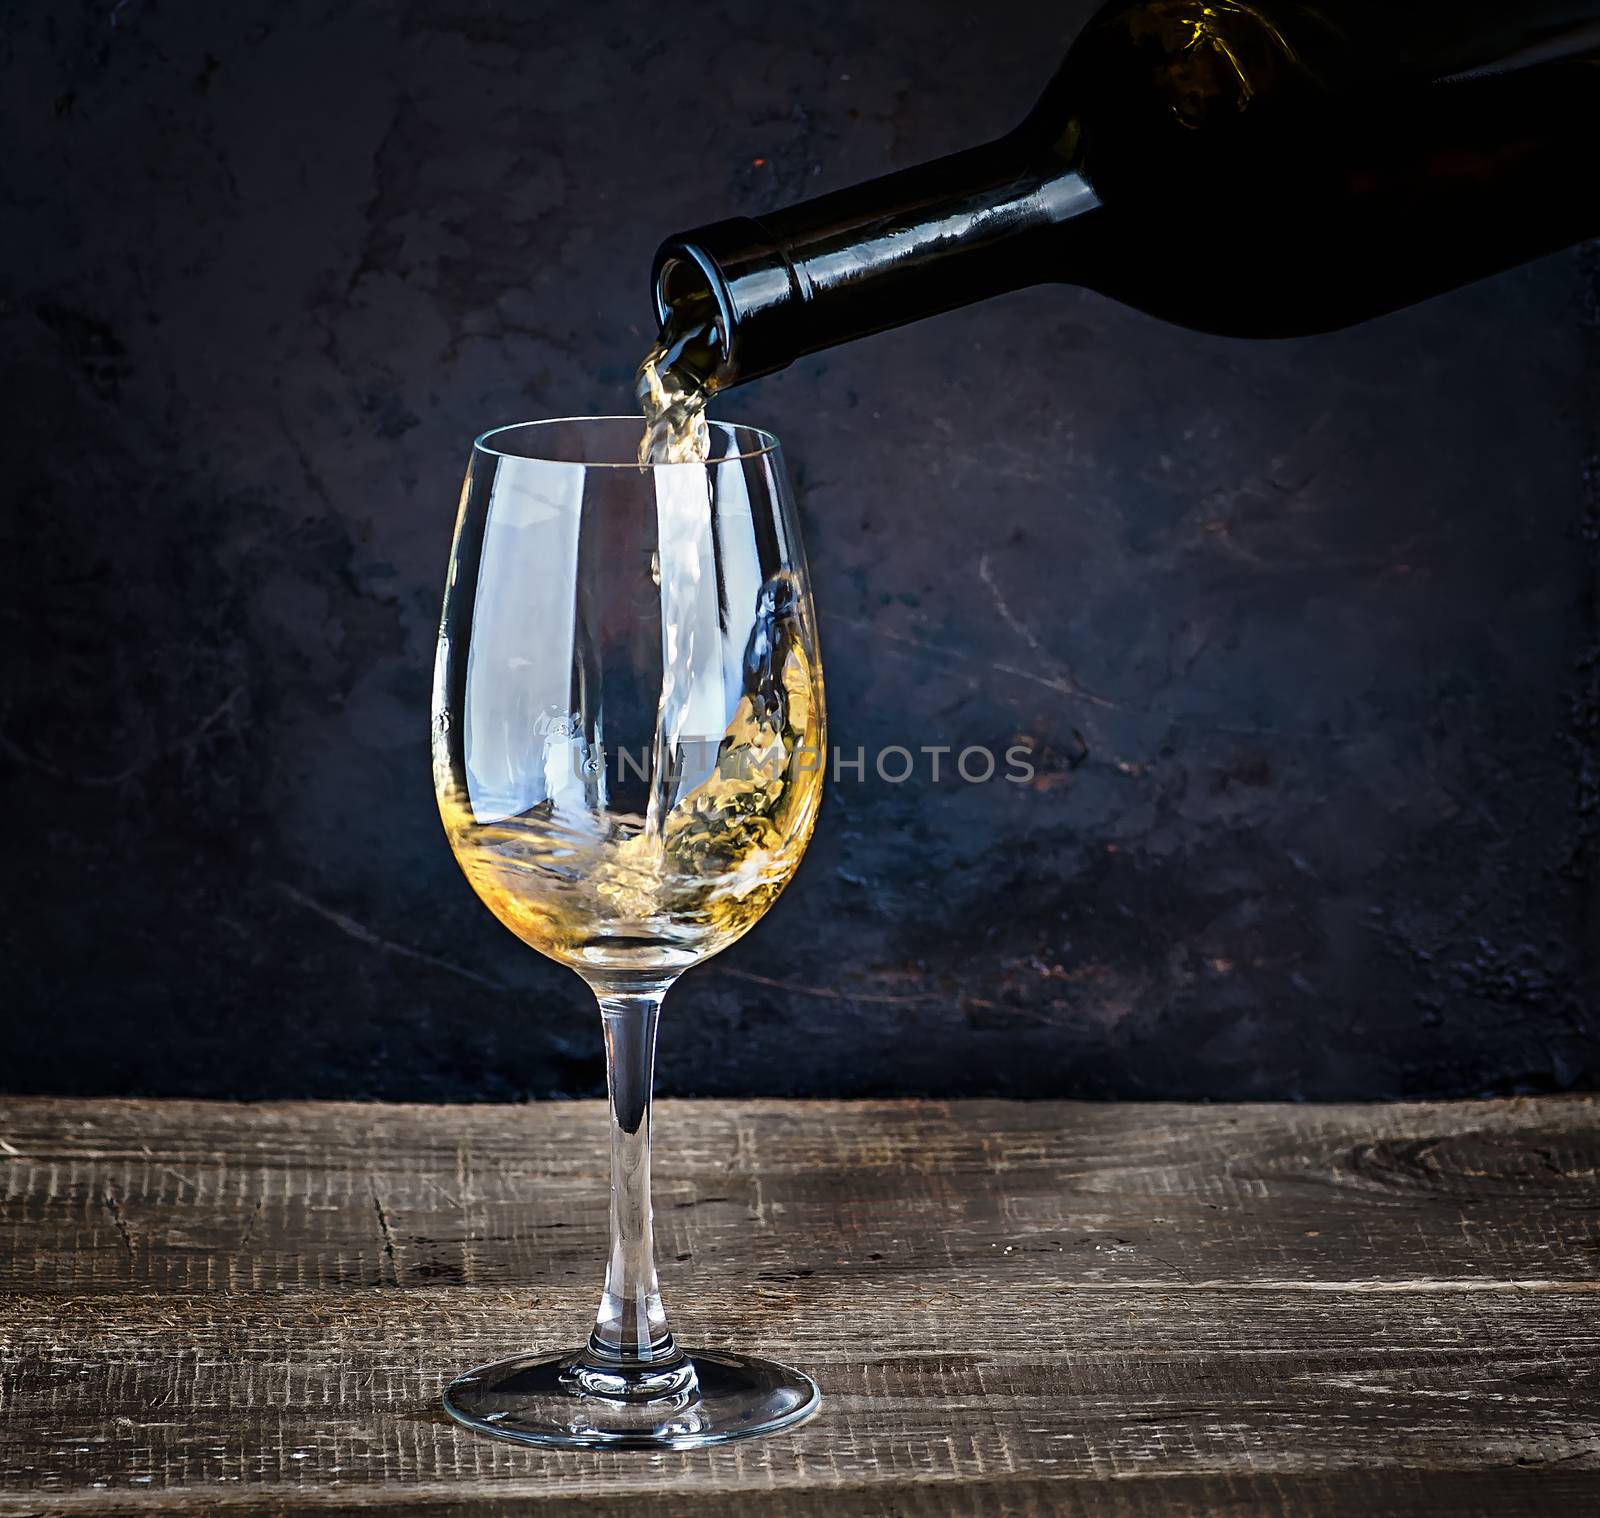 Pouring white wine from bottle by Cipariss